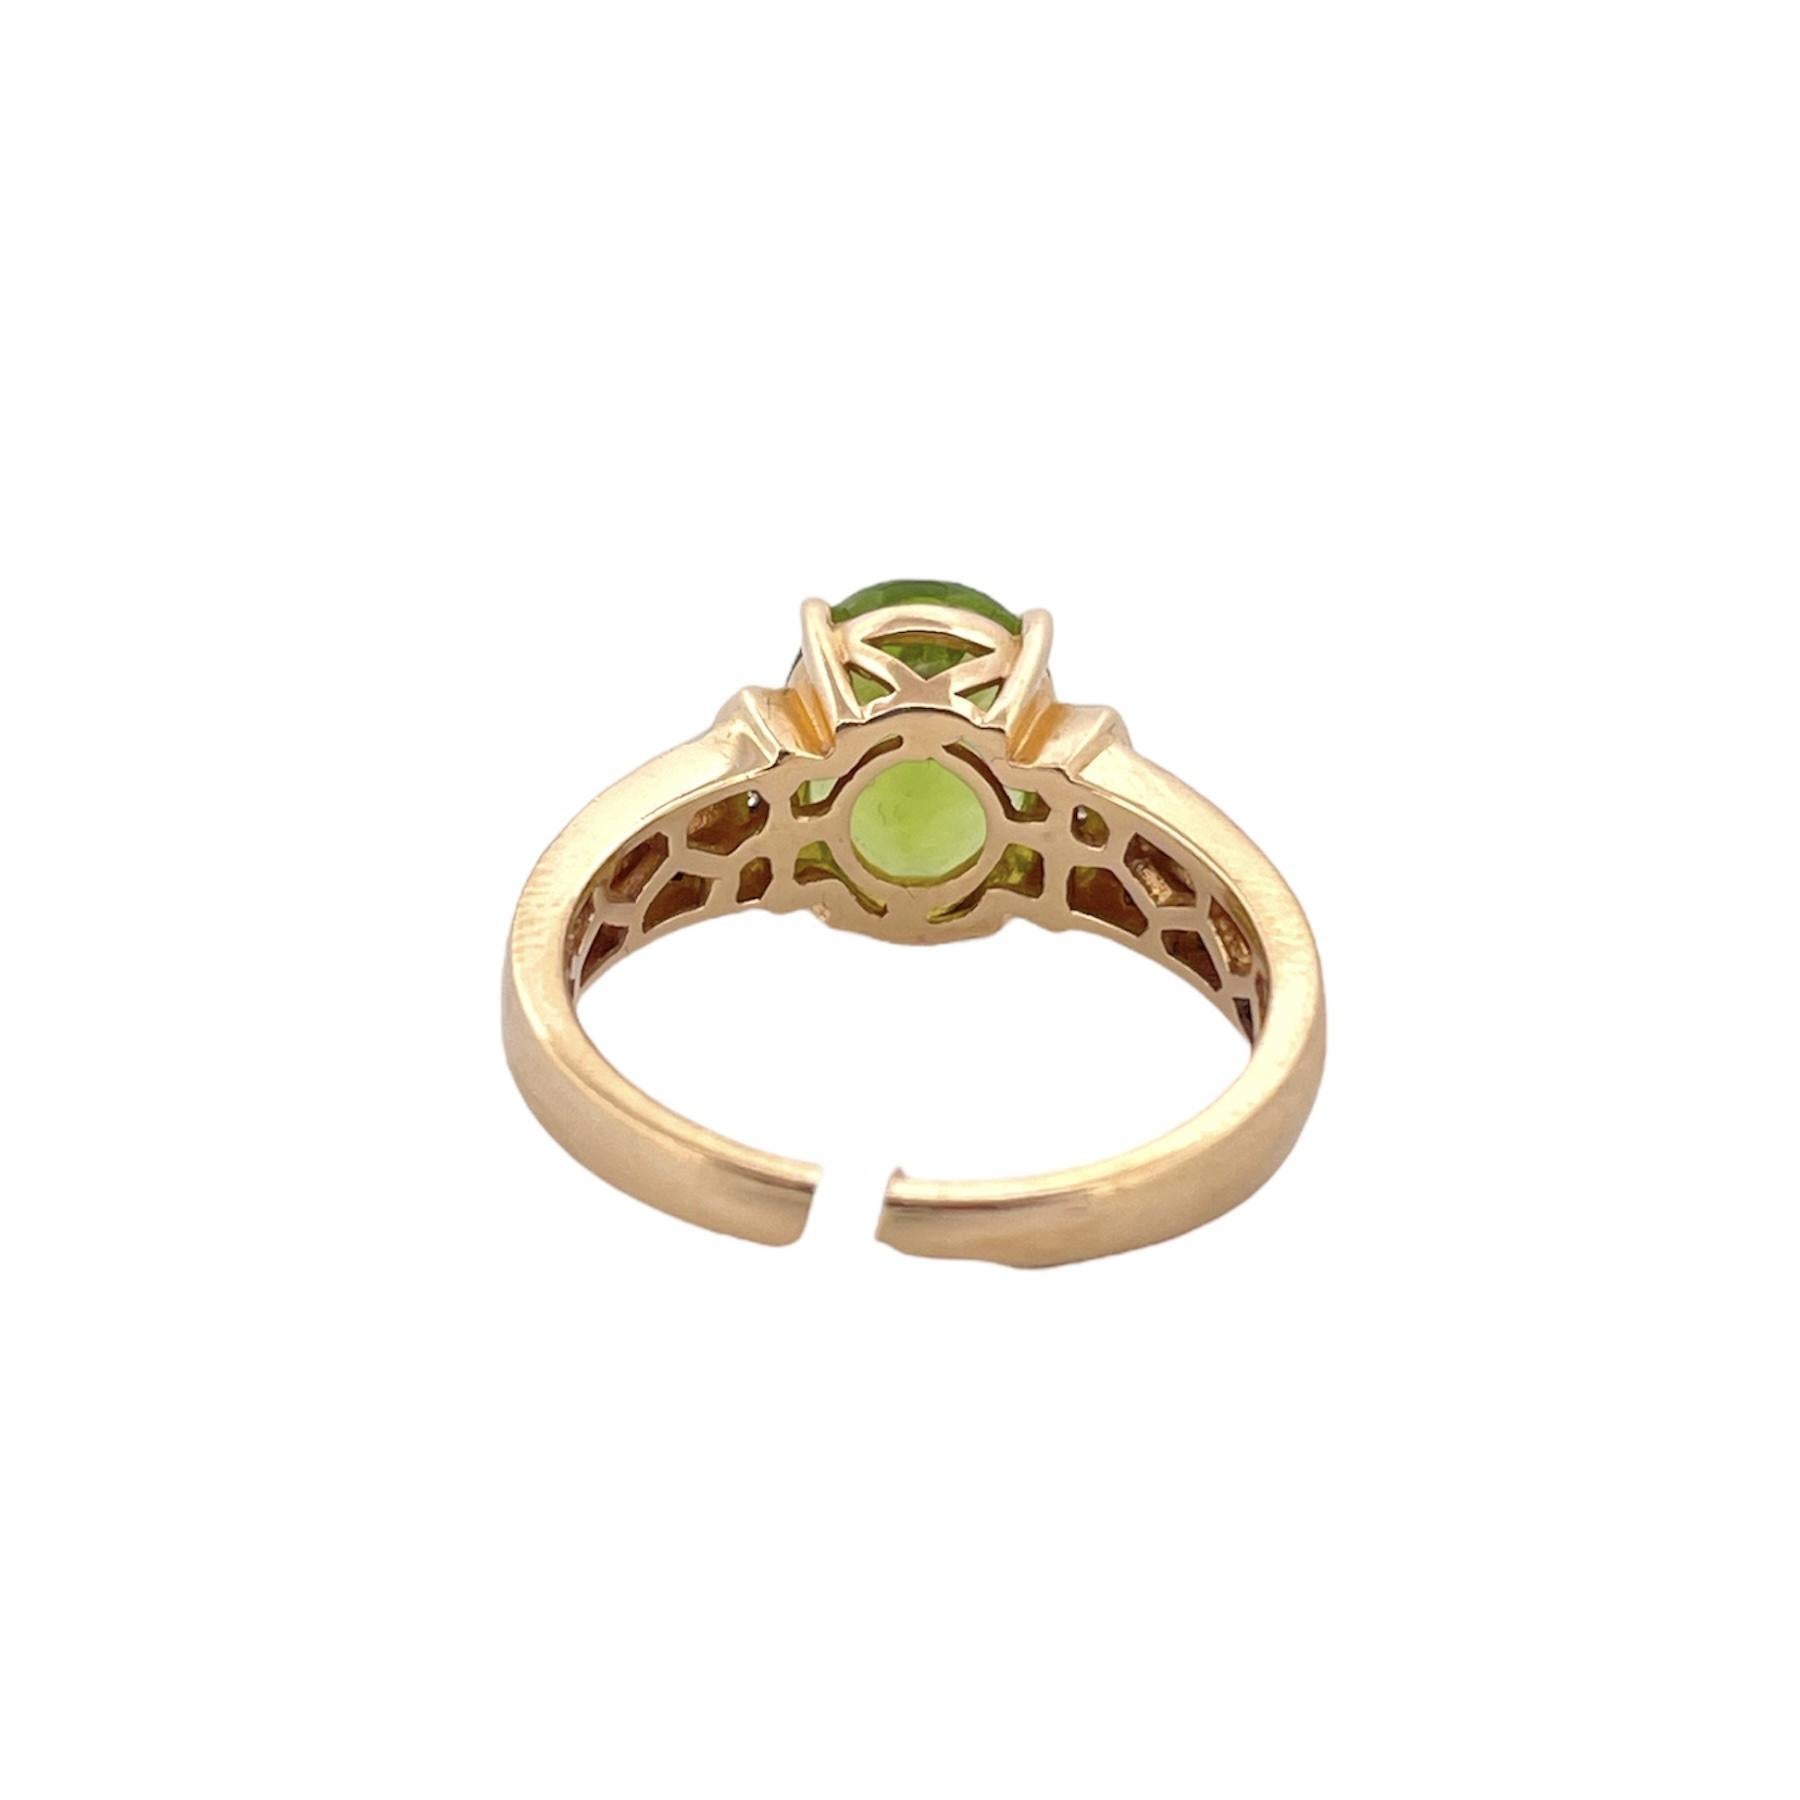 Oval Peridot Ring with Diamond Accents - 14K Yellow Gold In Good Condition For Sale In New York, NY